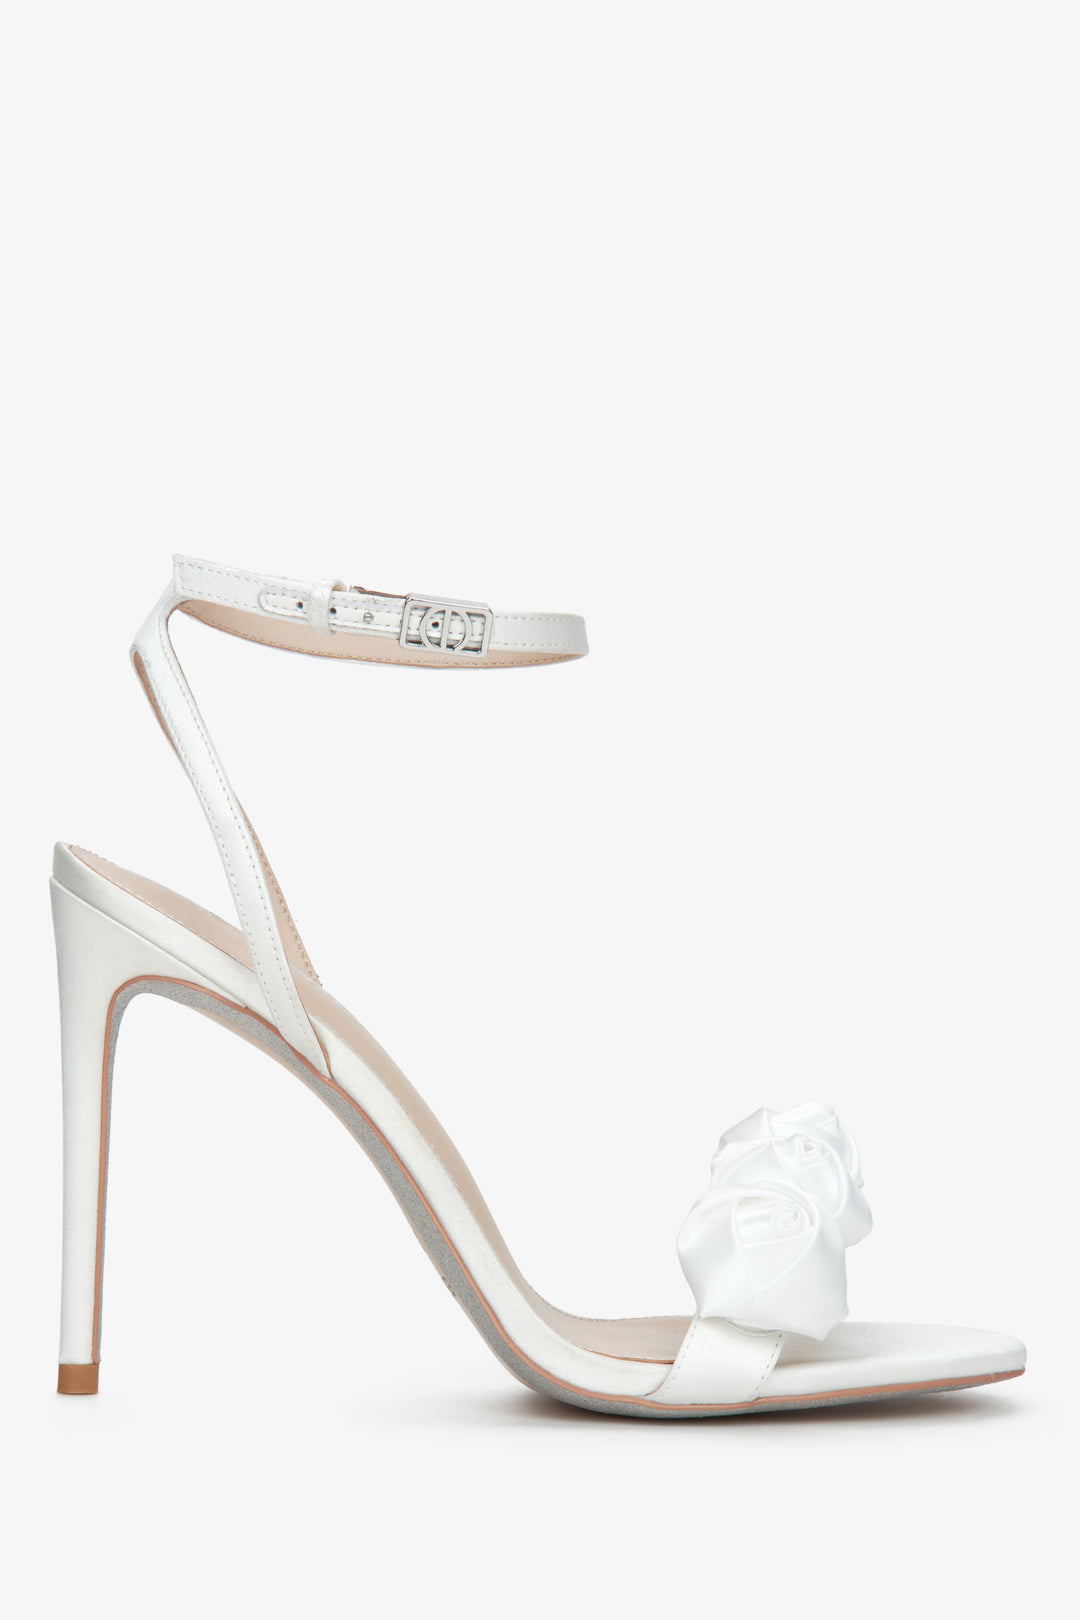 Women's White Stiletto Heels Sandals with Satin Finish and Floral Details Estro ER00114743.